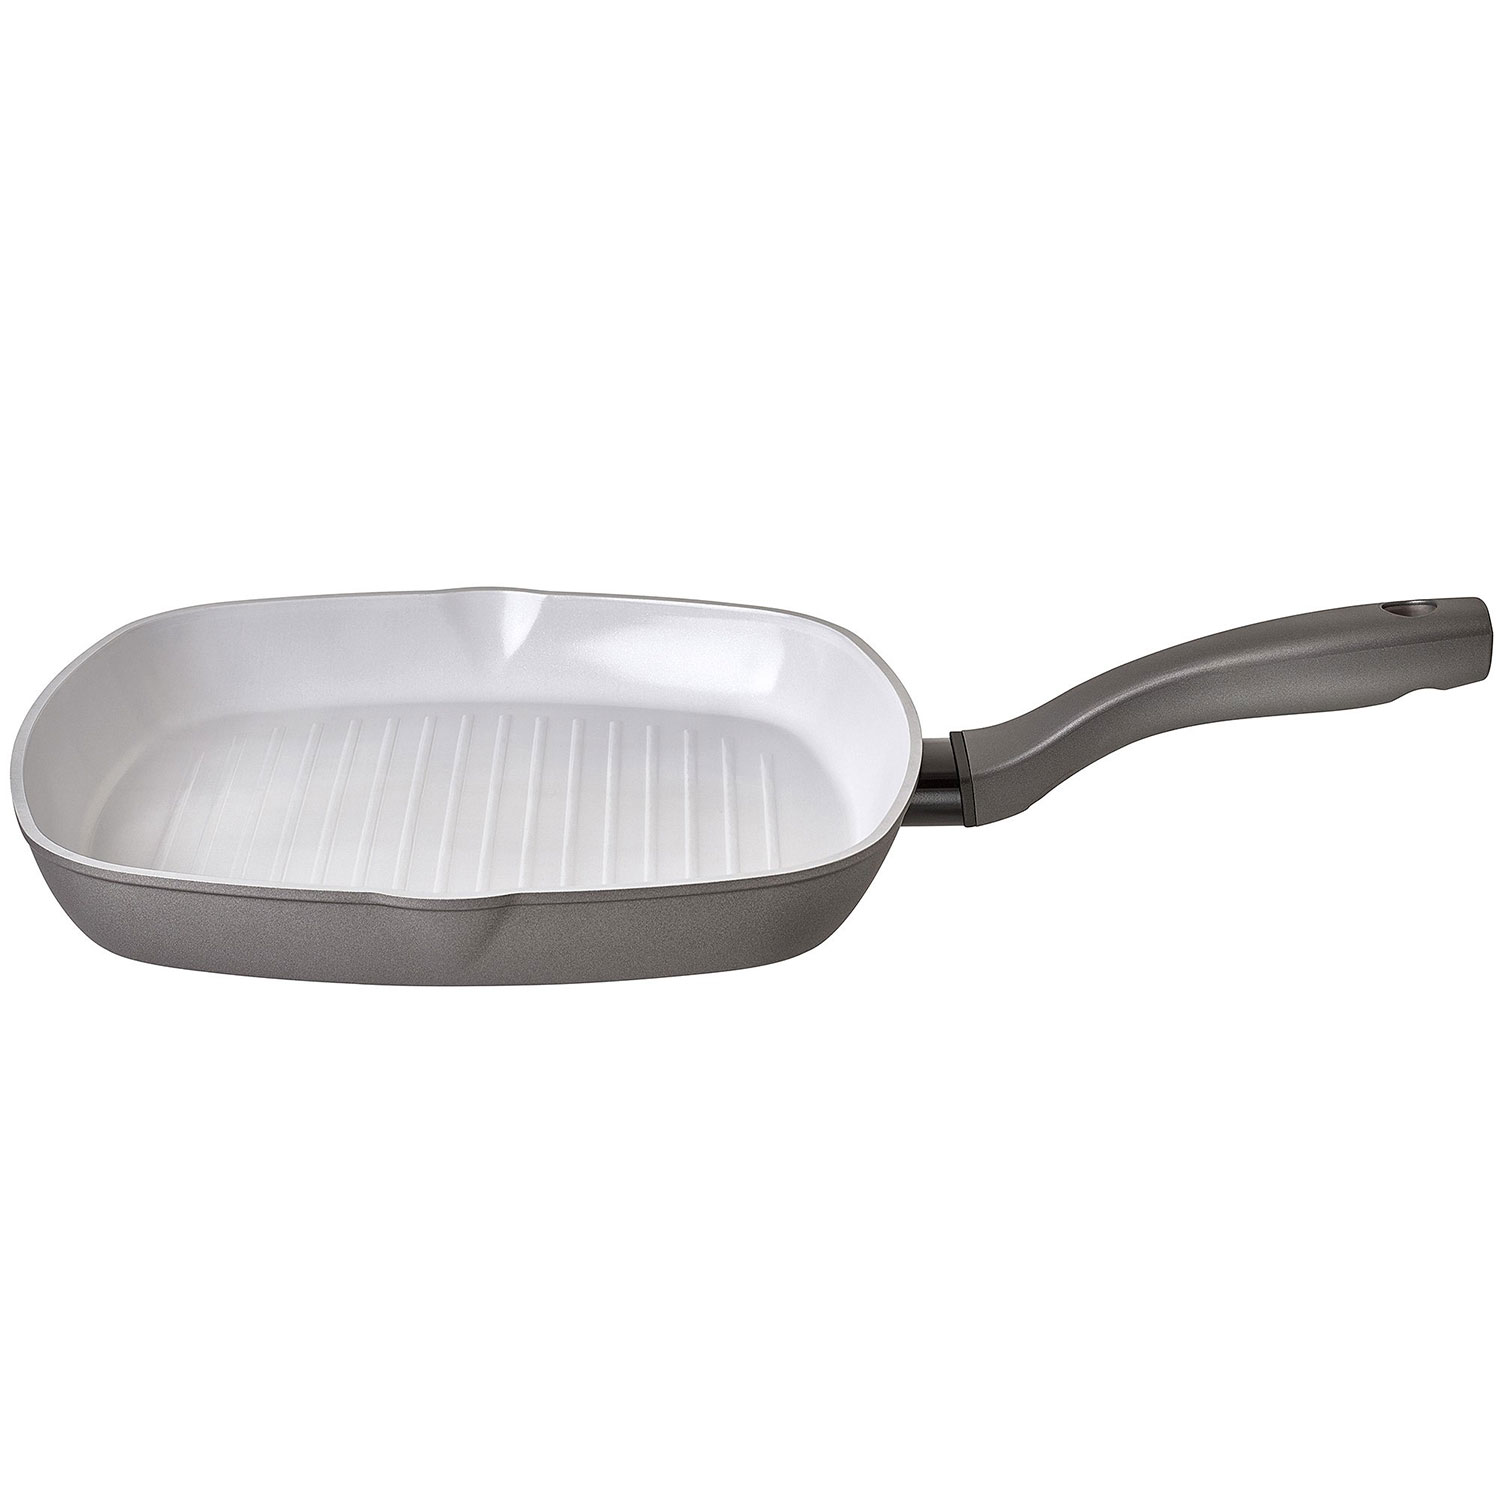 Meyer Earth Pan Grill Pan 28 cm - Frying Pans Recycled Aluminum Grey - 12734